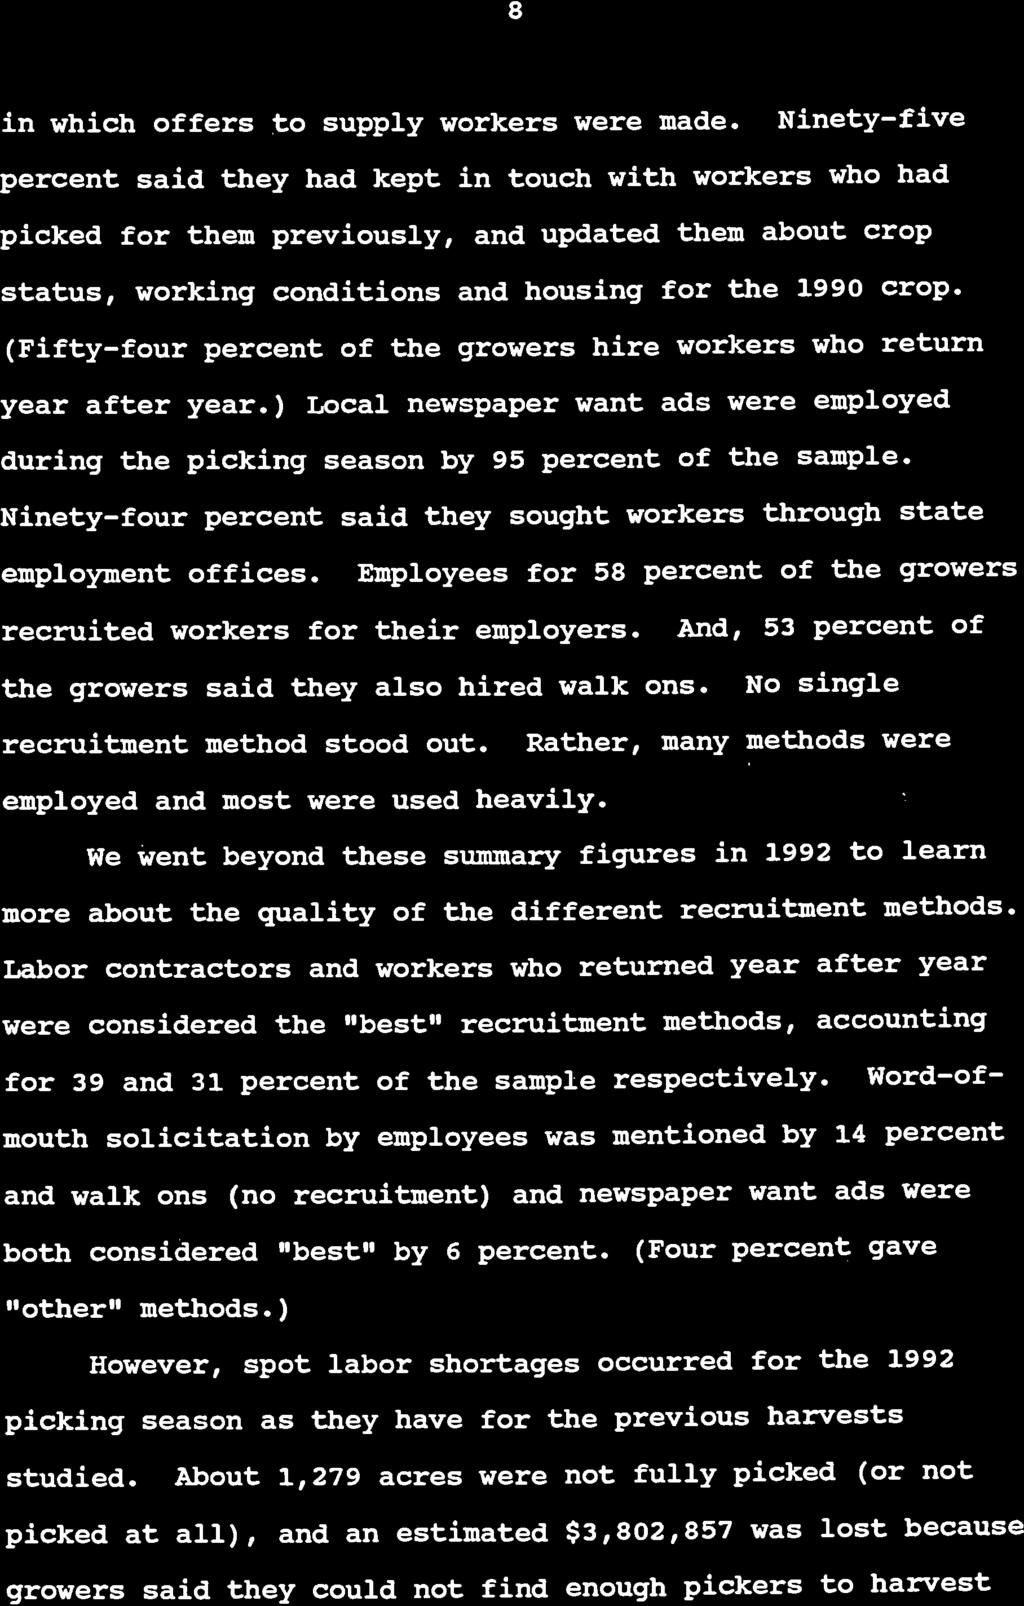 8 in which offers to supply workers were made.